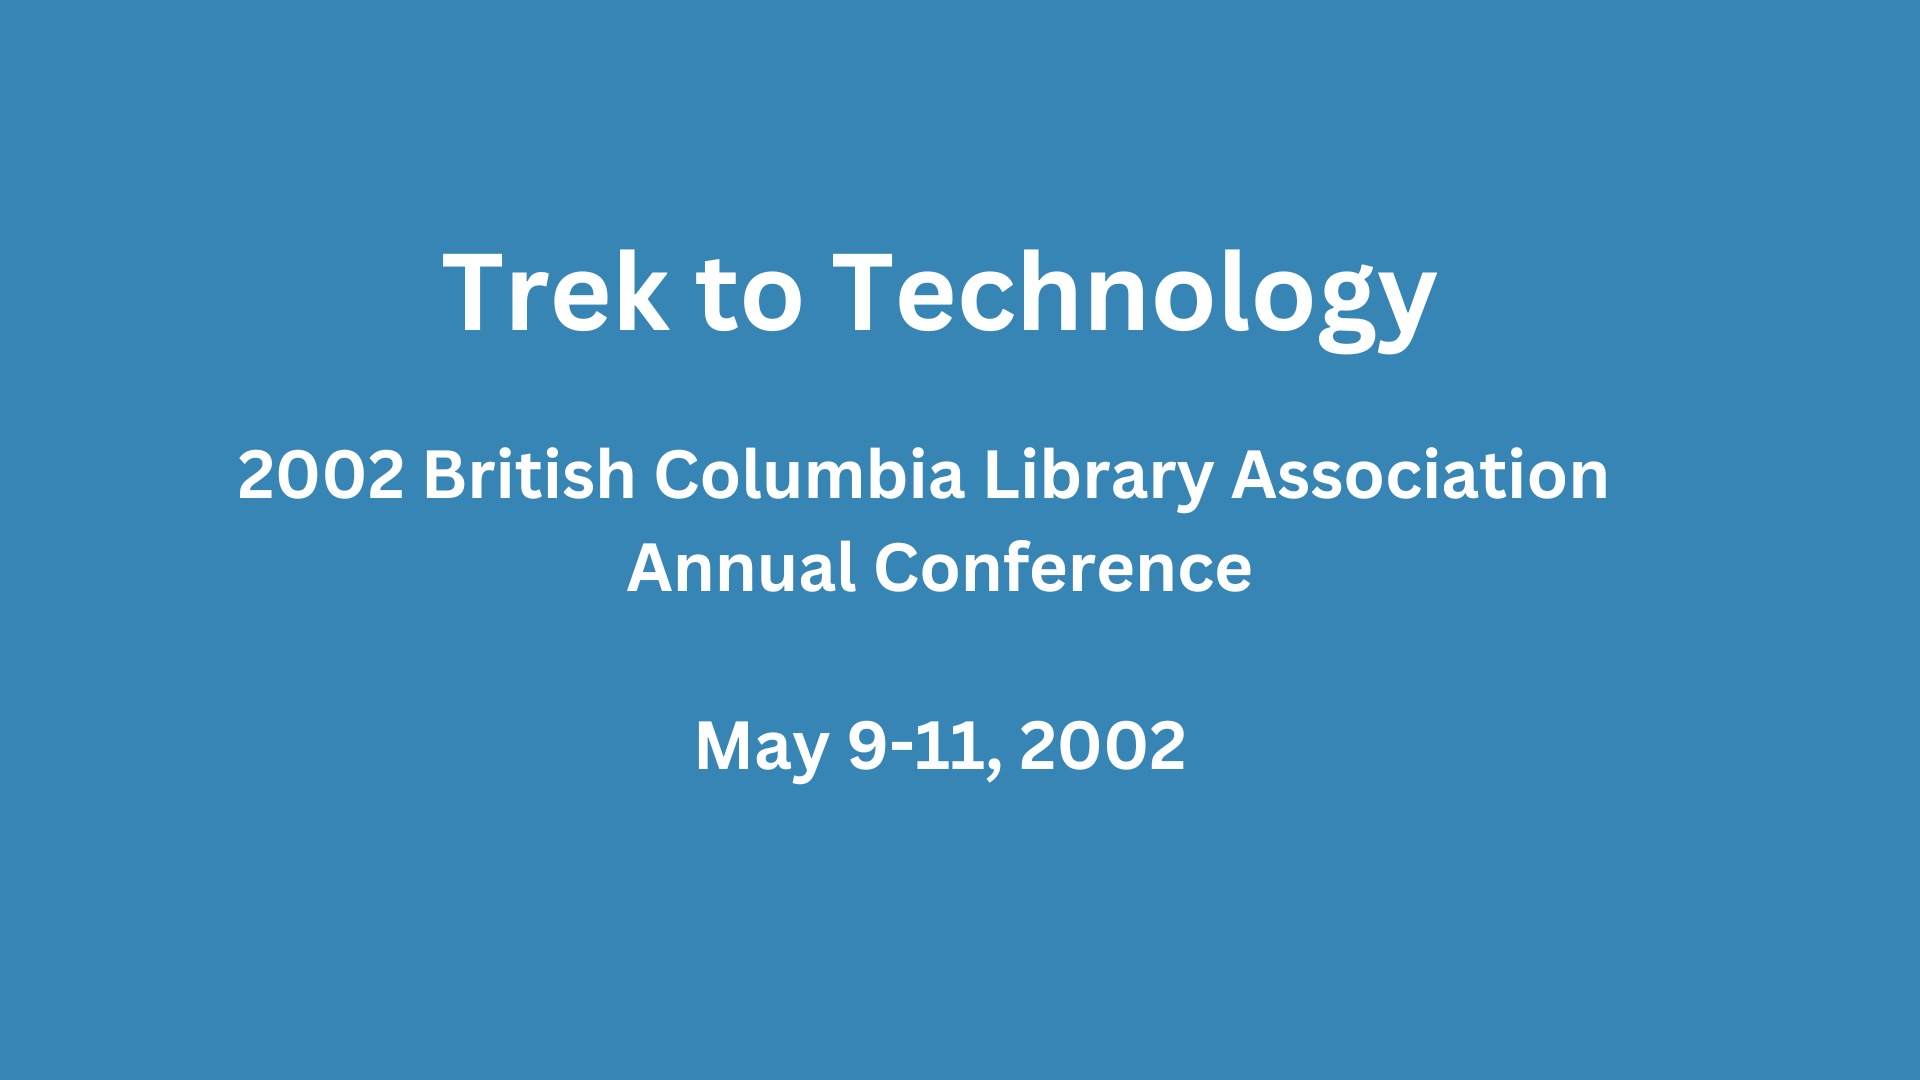 Graphic with text "Trek to Technology 2002 British Colmbia Library Association Annual Conference May 9-11, 2002"